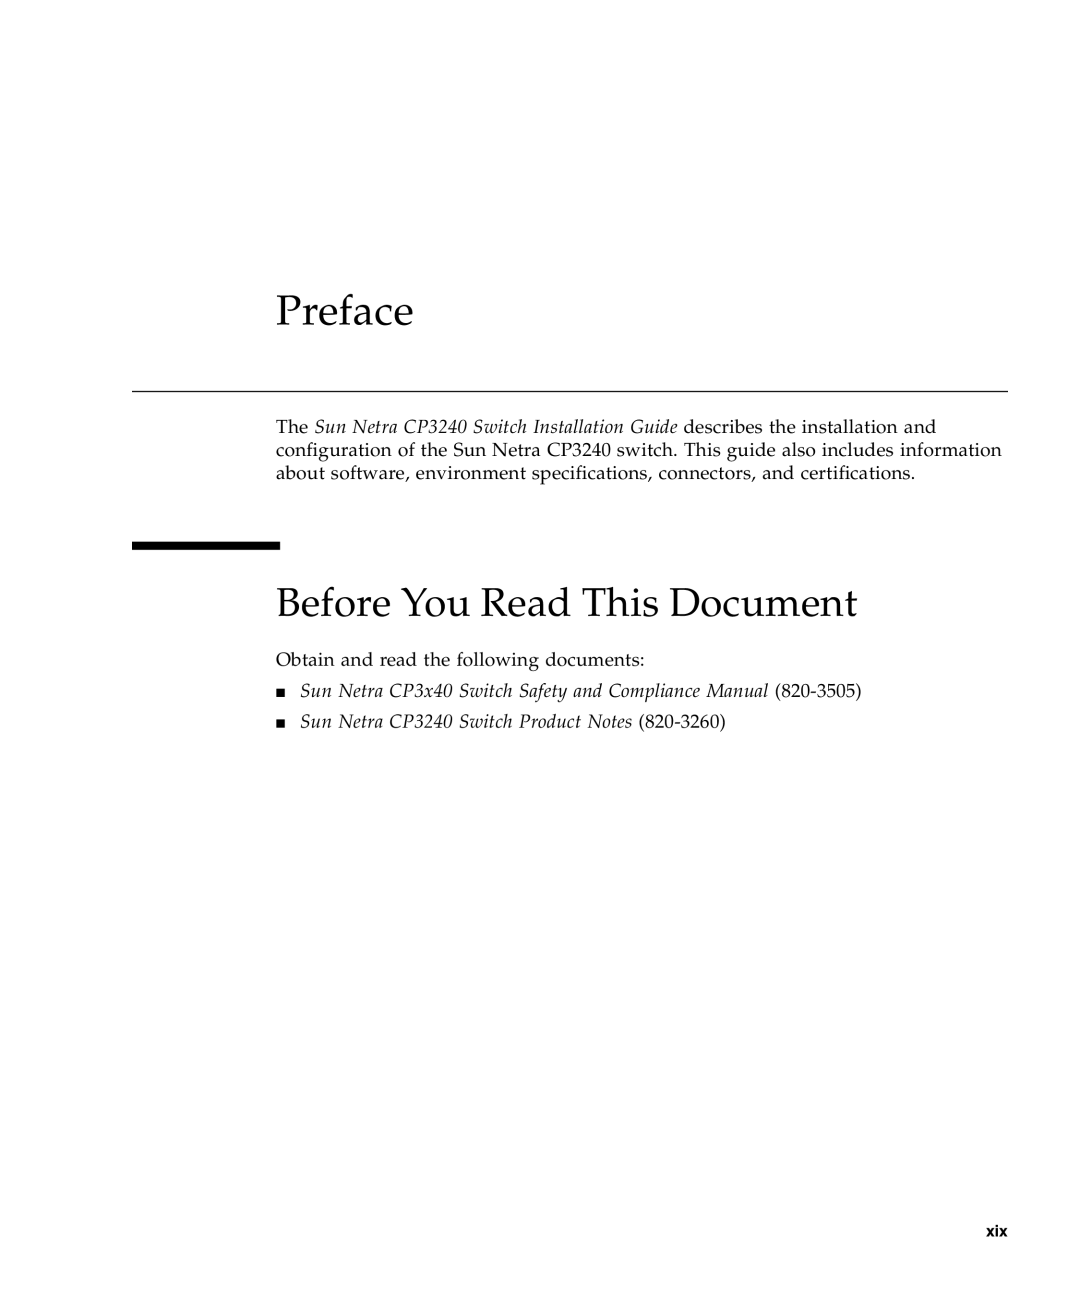 Sun Microsystems CP3240 manual Preface, Before You Read This Document 